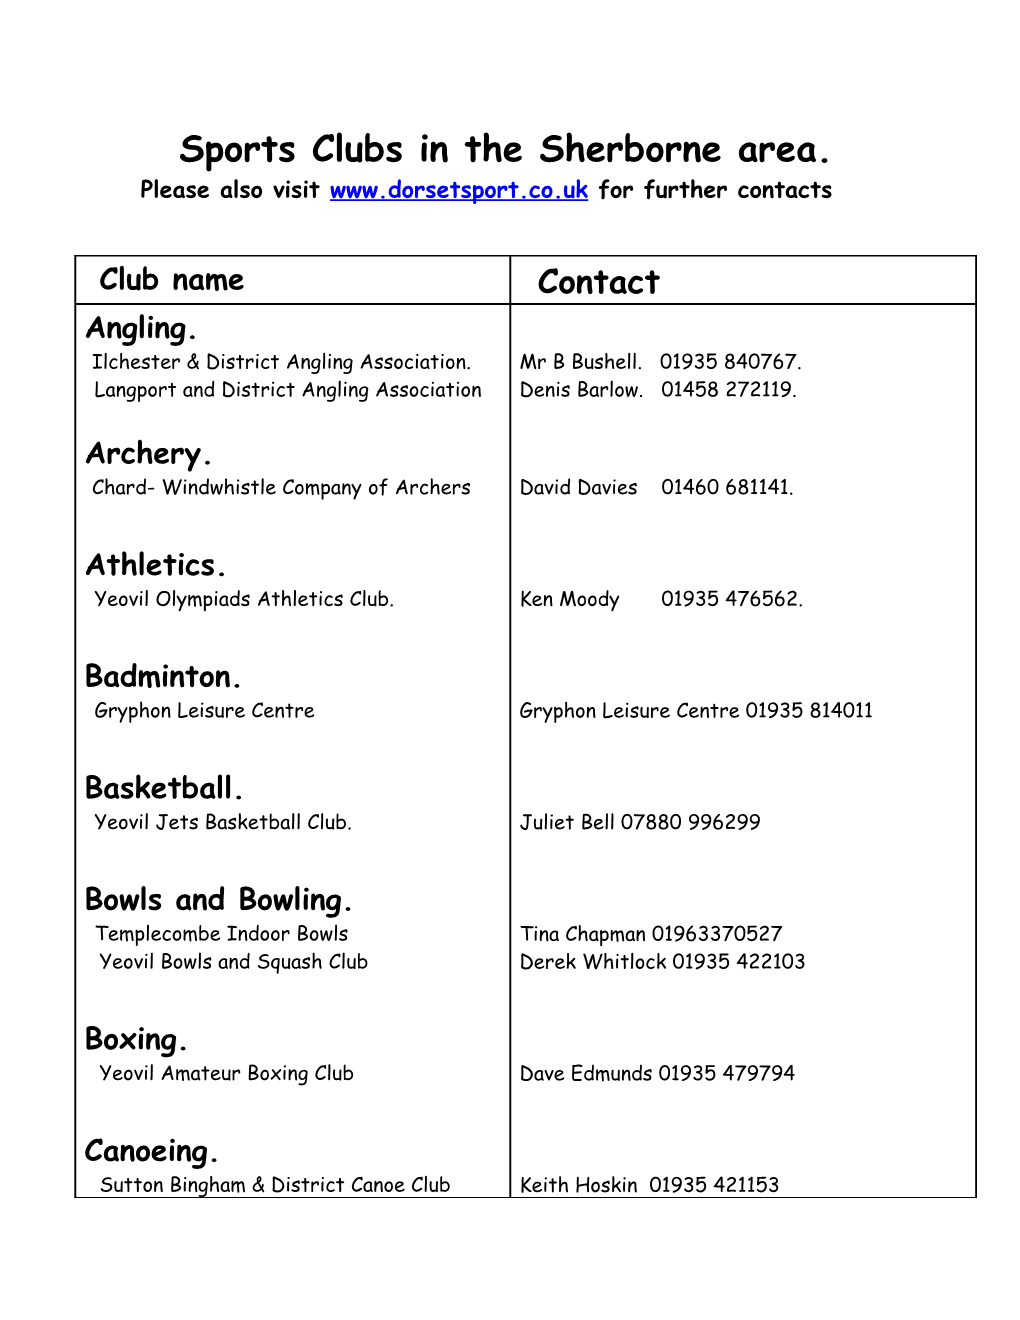 Sports Clubs in the Sherborne Area